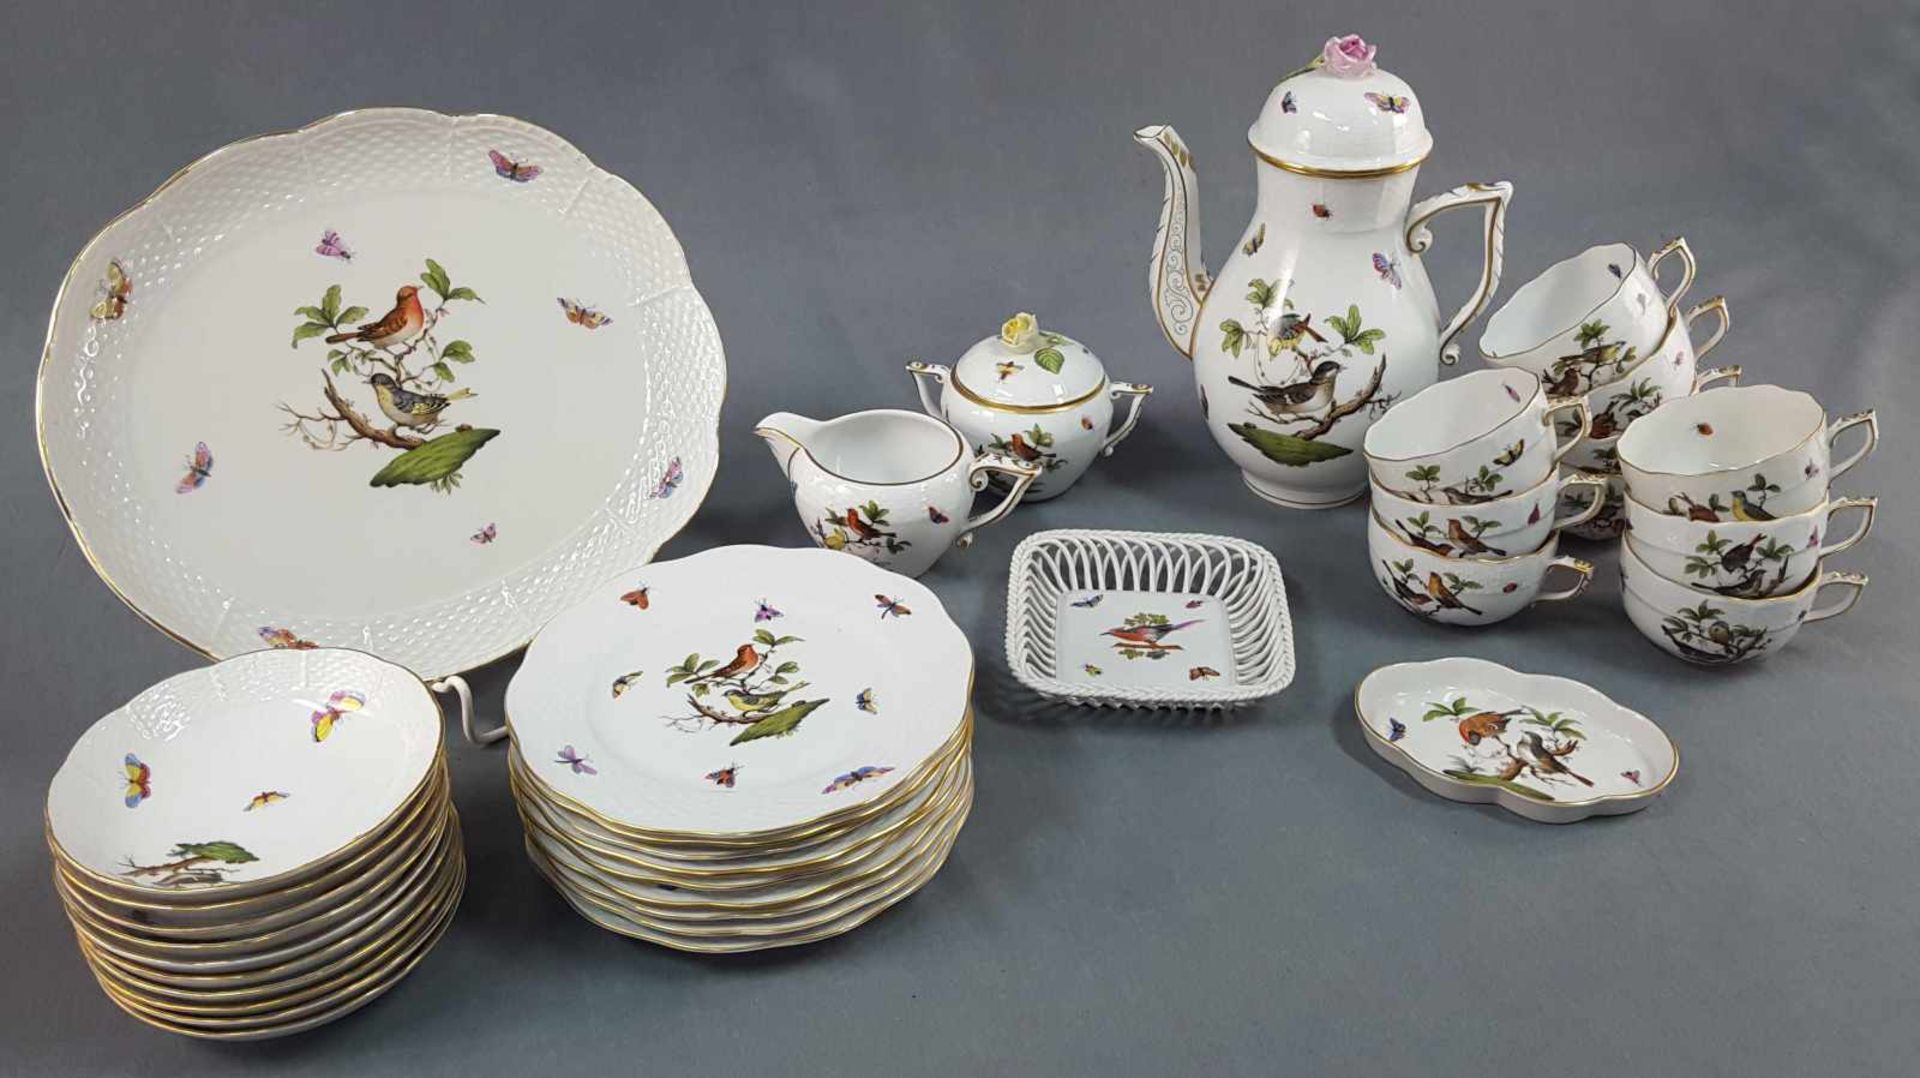 Herend Porcelain. Coffee service for at least 9 people.